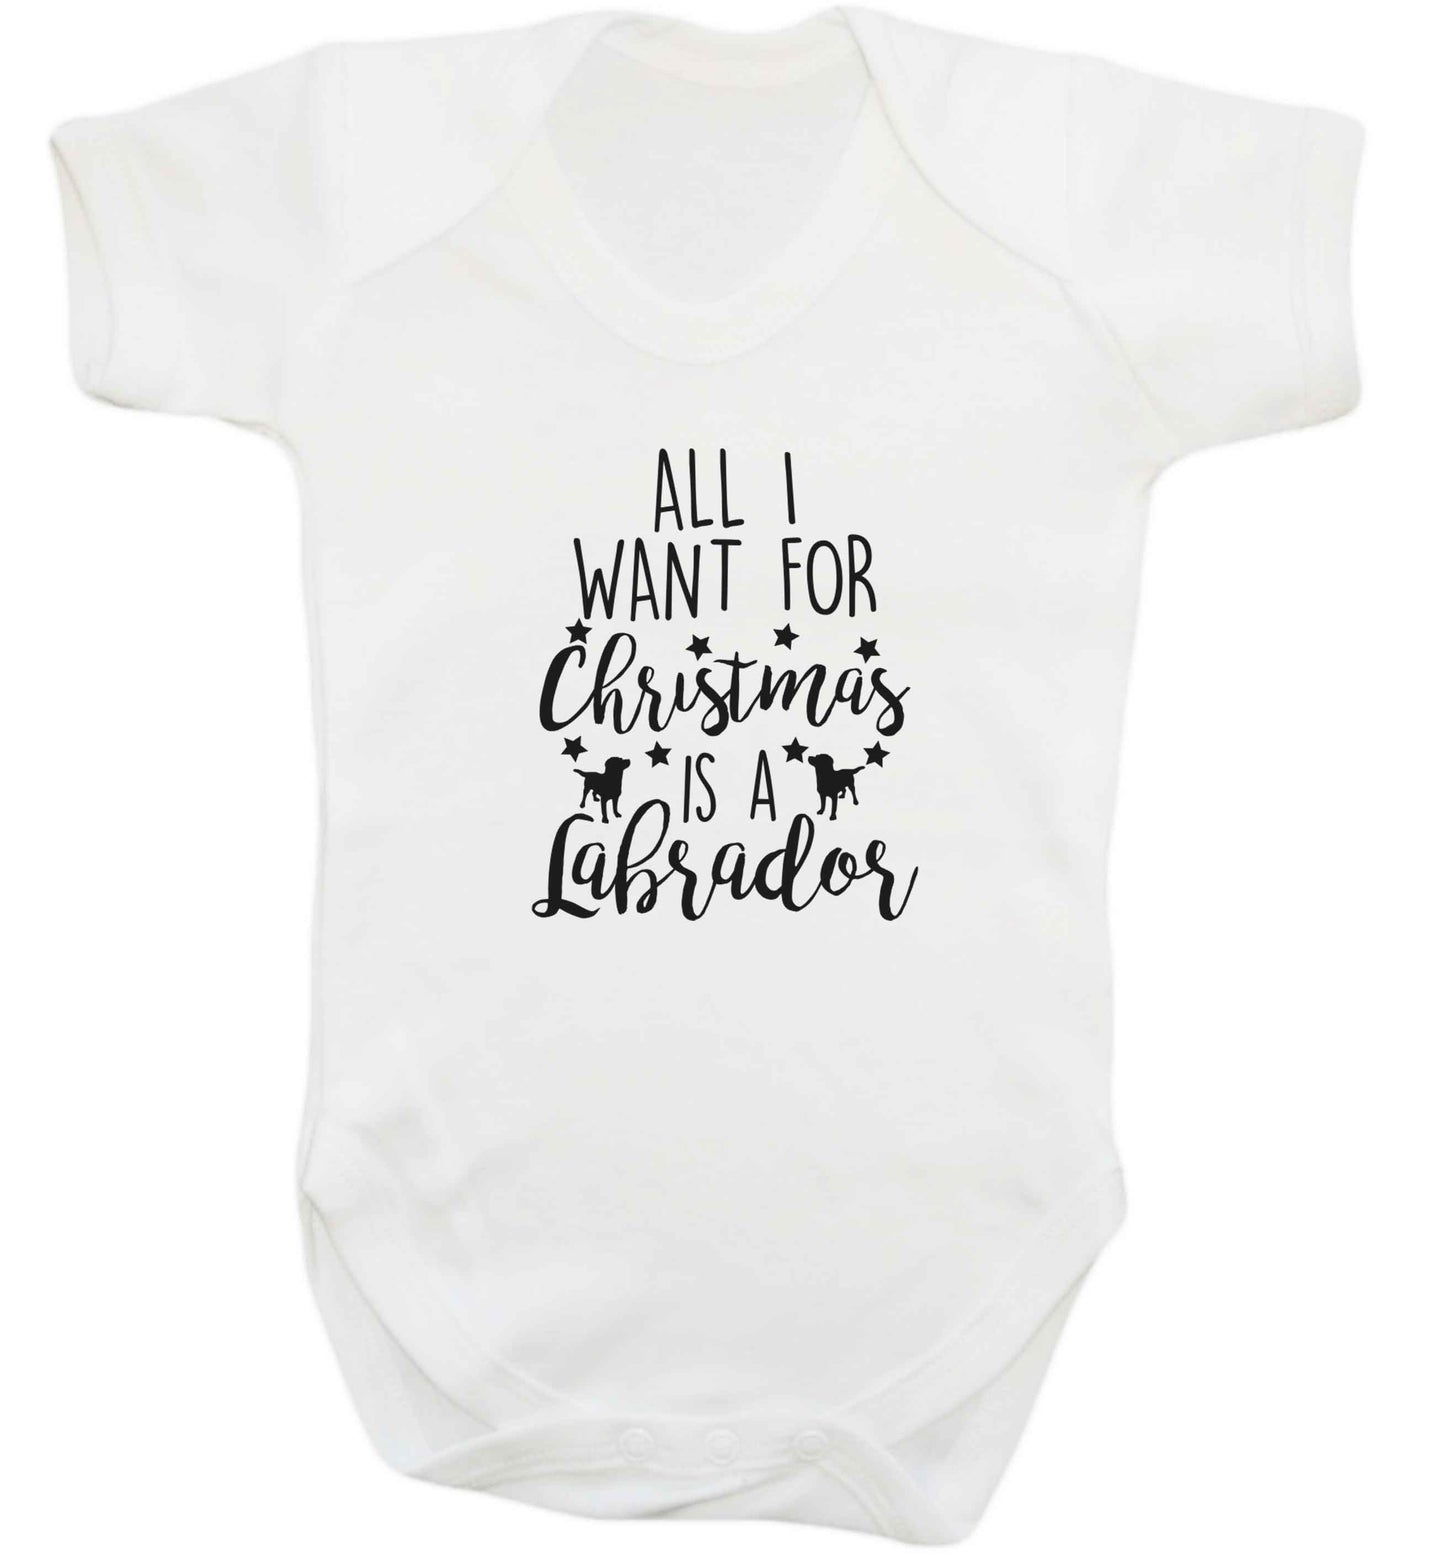 All I want for Christmas is a labrador baby vest white 18-24 months